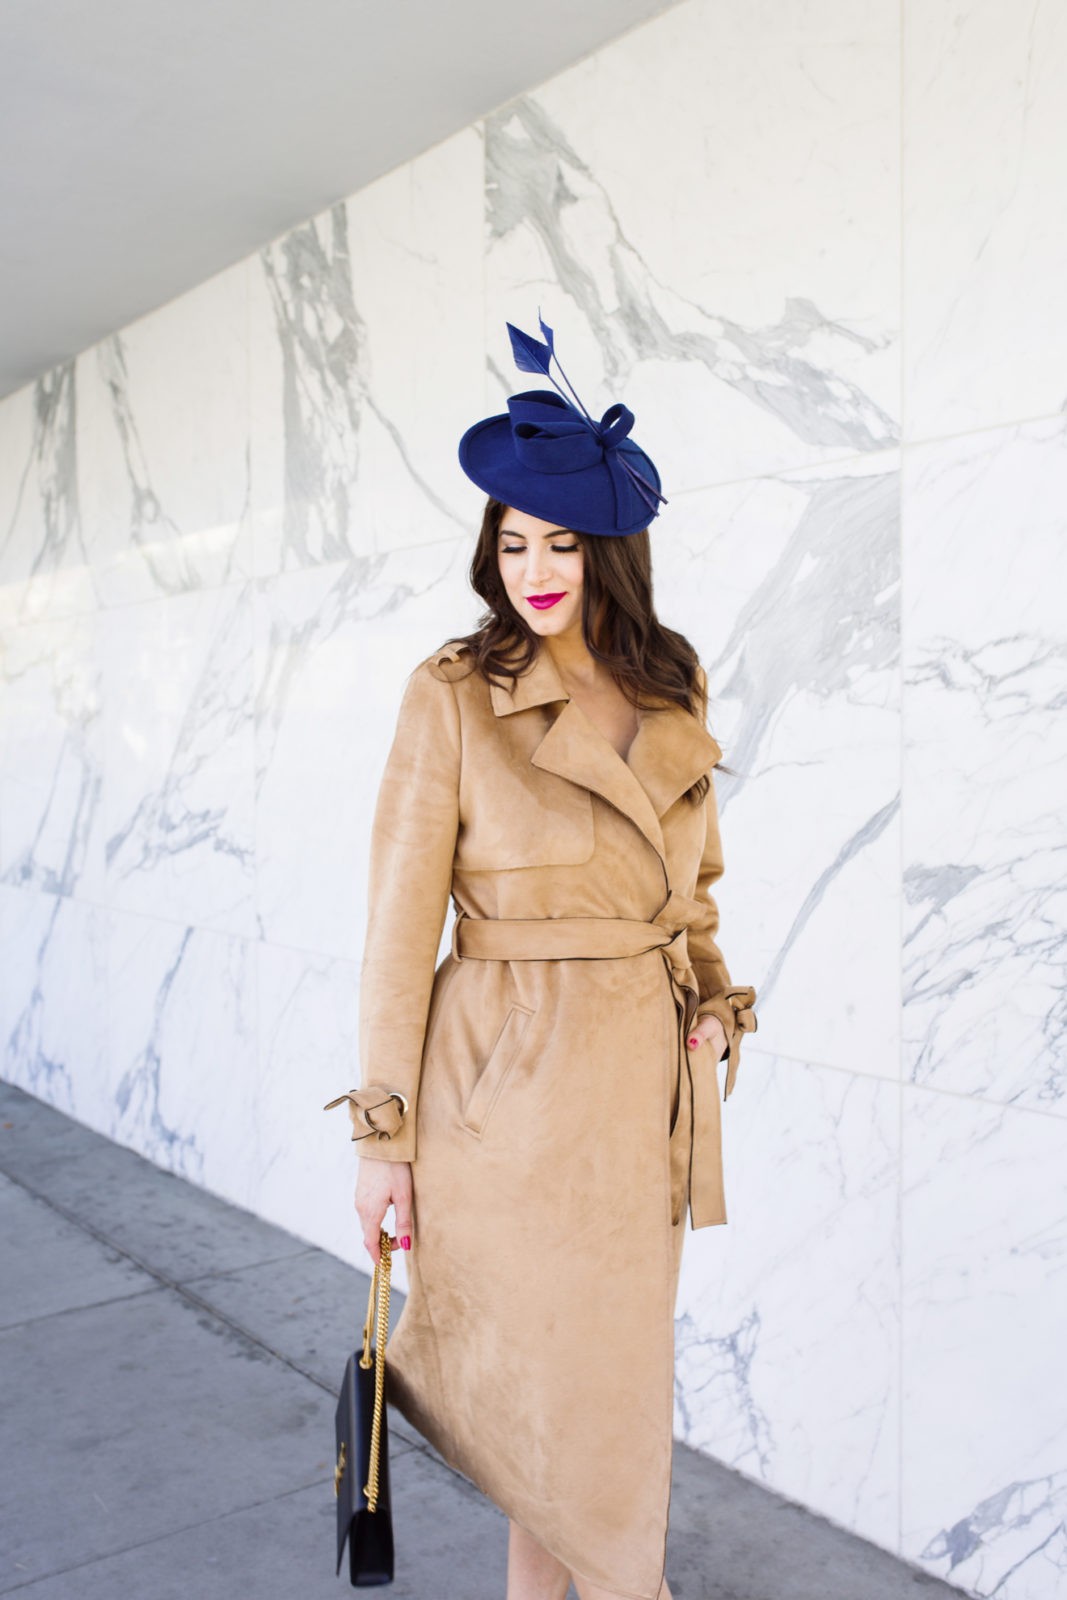 Top US fashion blogger, Laura Lily, features the best fascinators: image of a woman wearing a vintage blue fascinator, River Island trench coat, Yves Saint Laurent shoulder bag, and Schutz heels. | The Marvelous Mrs. Maisel Style, Suede River Island Trench Coat,